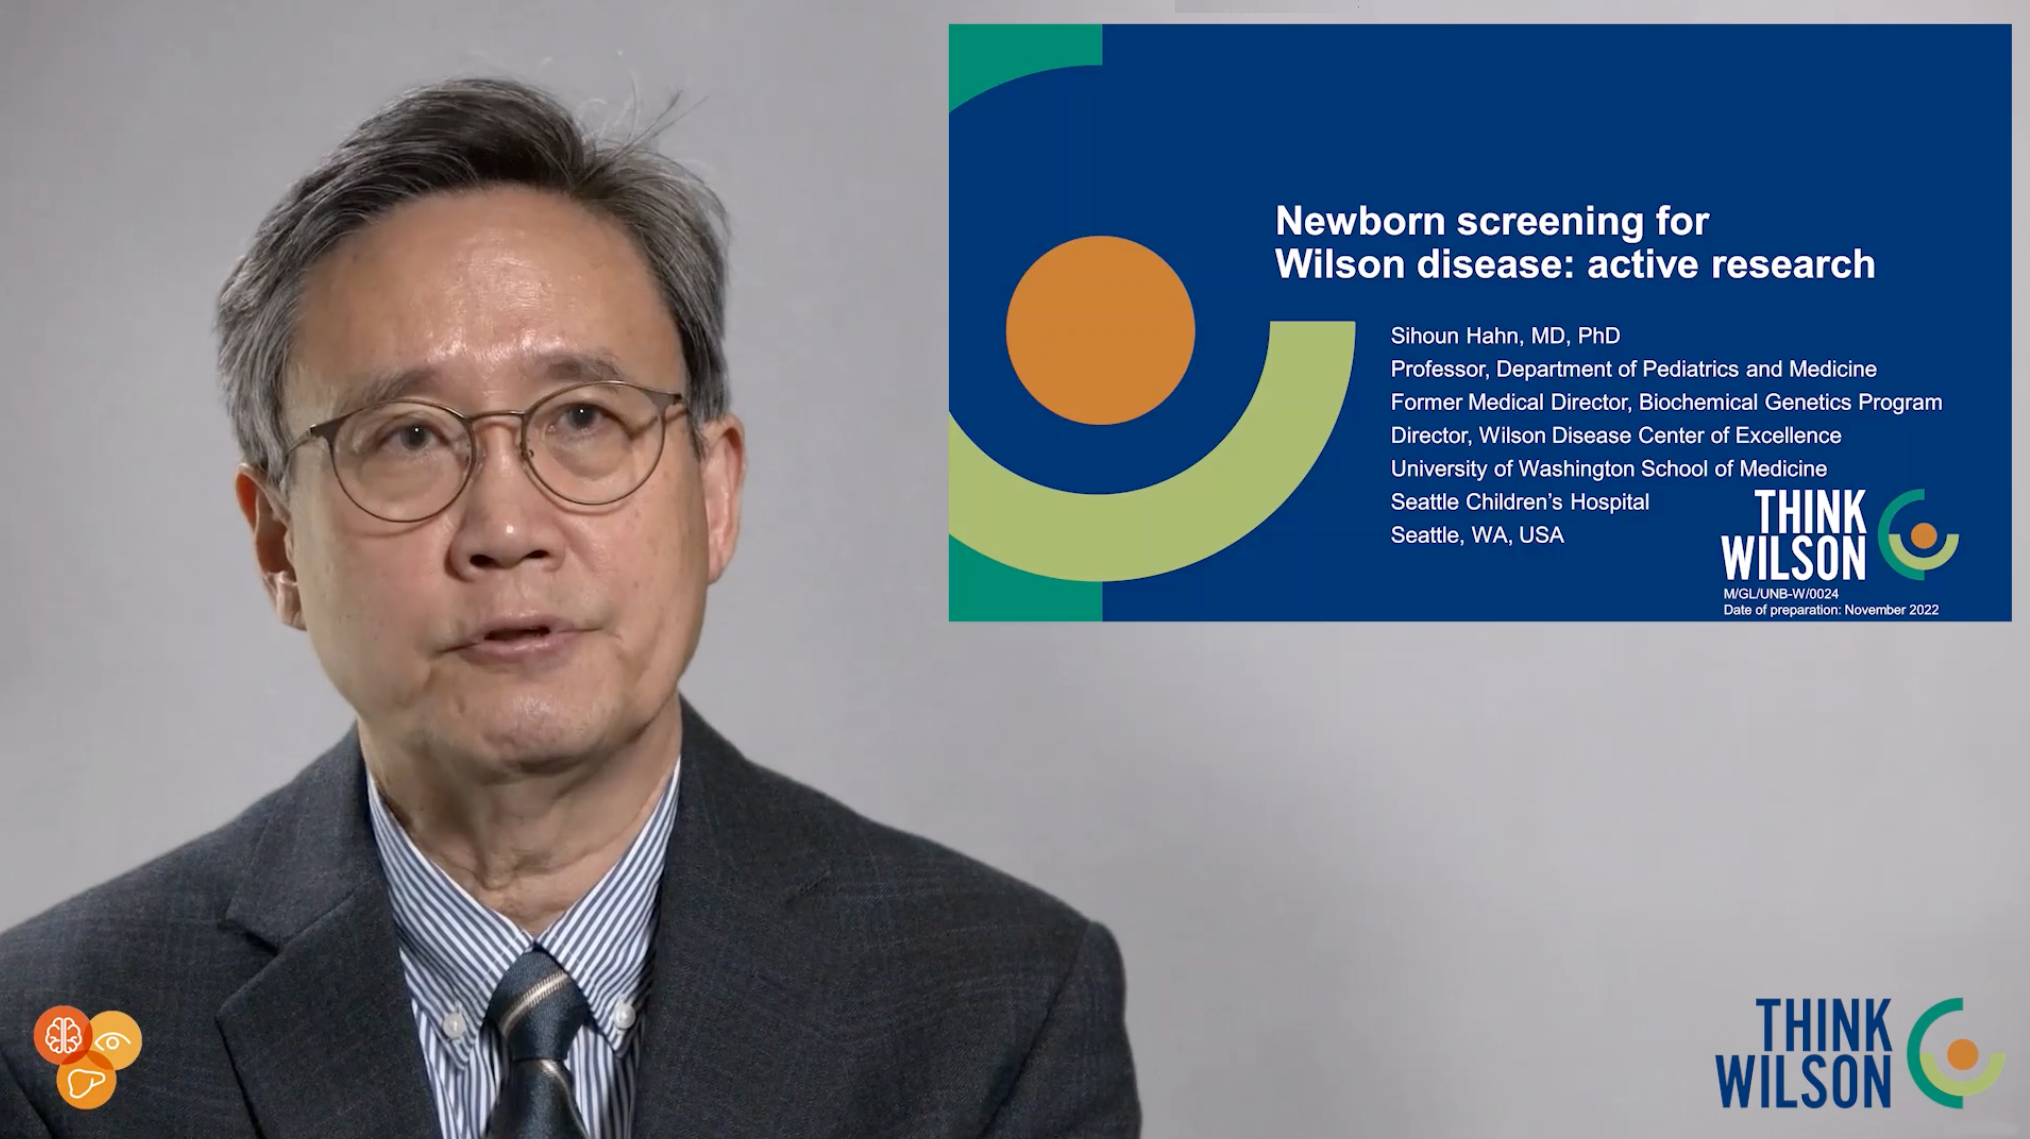 Video showing Sihoun Hahn, MD, PhD Professor, Department of Pediatrics and Medicine. Former Medical Director, Biochemical Genetics Program Director, Wilson Disease Center of Excellence. University of Washington School of Medicine. From Seattle, WA, USA. Explaining the Newborn screening for Wilson disease: active research